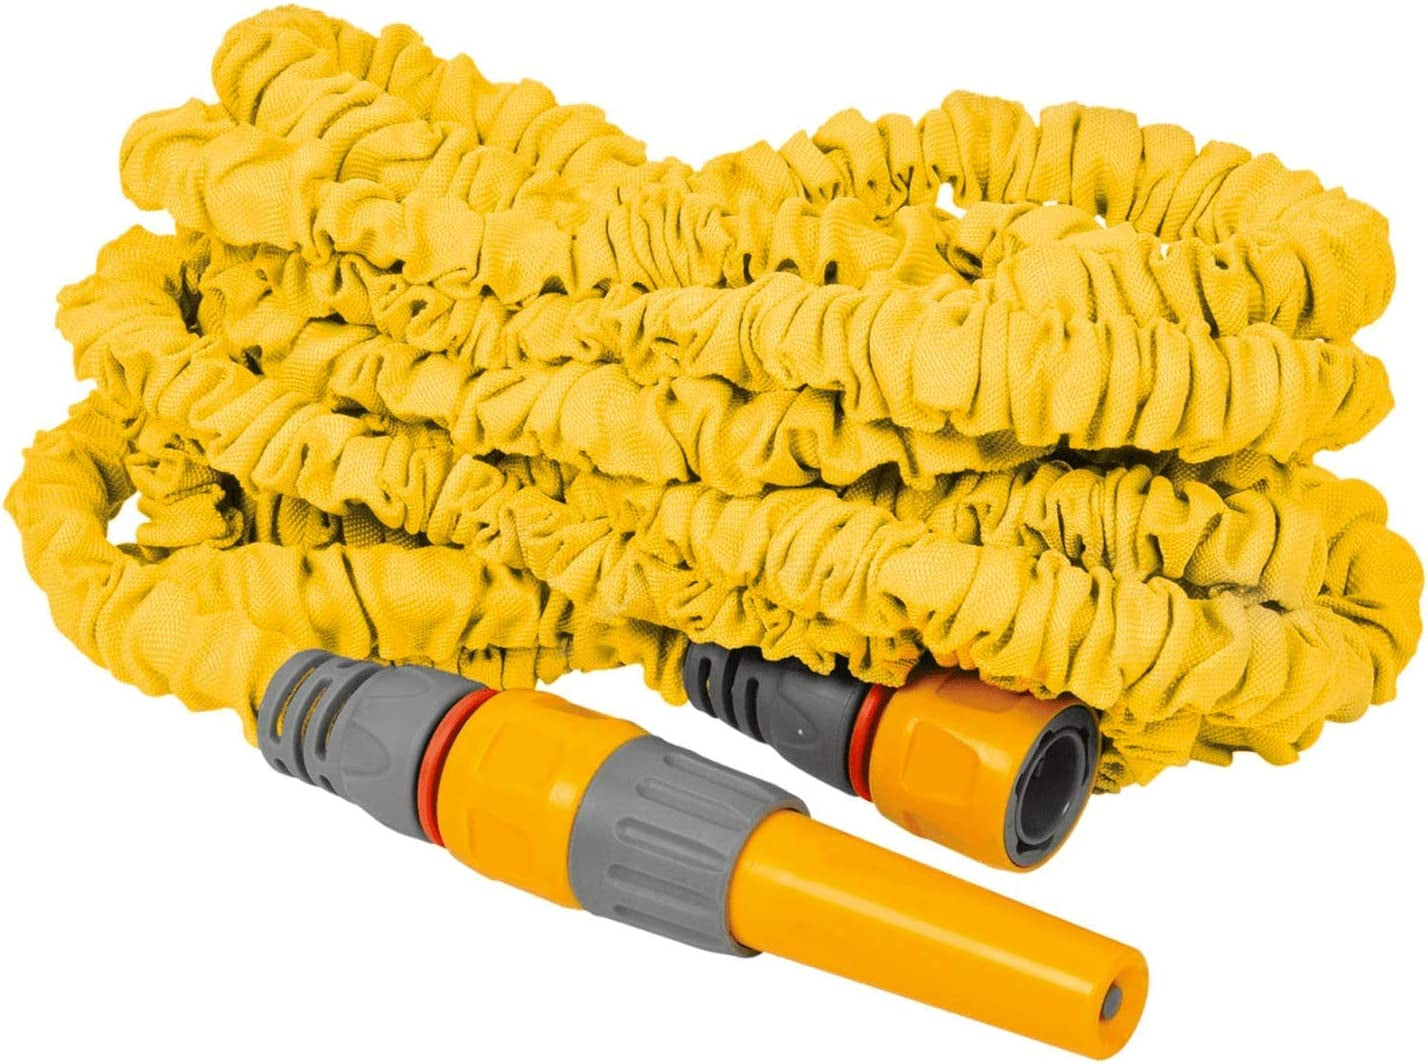 - Superhoze Expanding Hose 7.5 M : Flexible Hose, Stretches up to 3X Original Length | with 2 Aquastop Fittings for a Watertight Connection: Ready to Use [8207A1240]